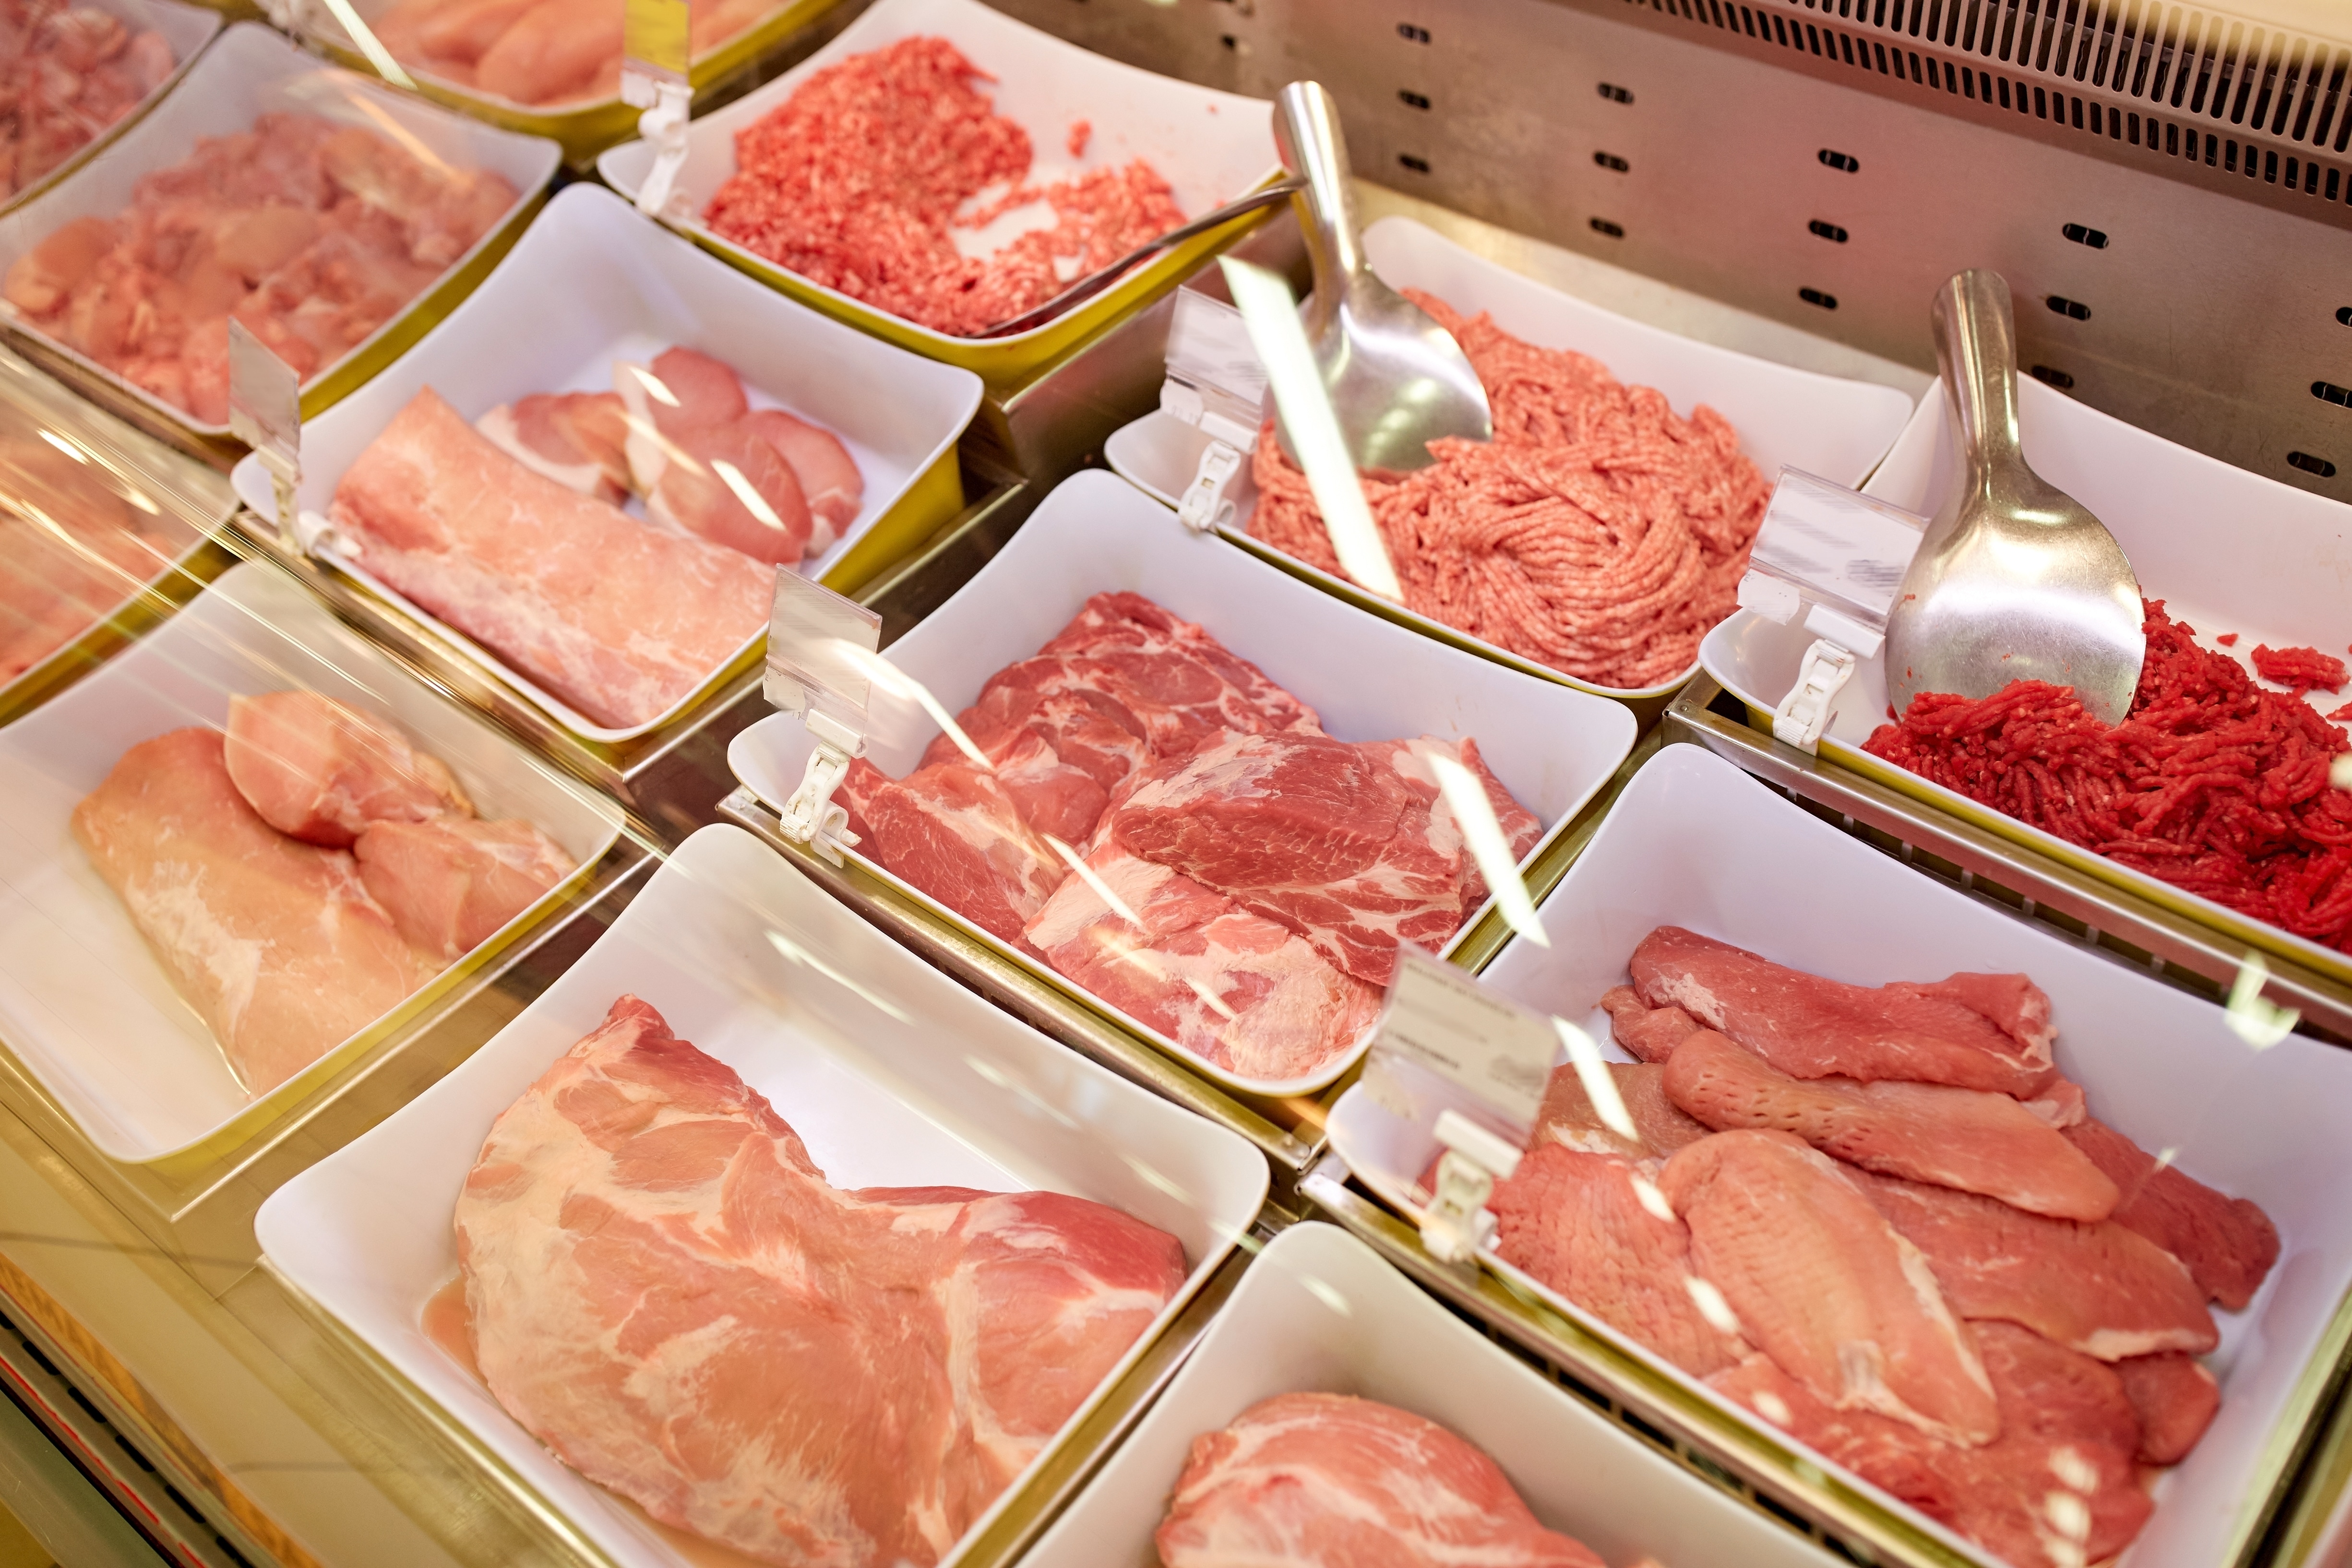 U.S. Pork Exports Hit Record Levels In 2019